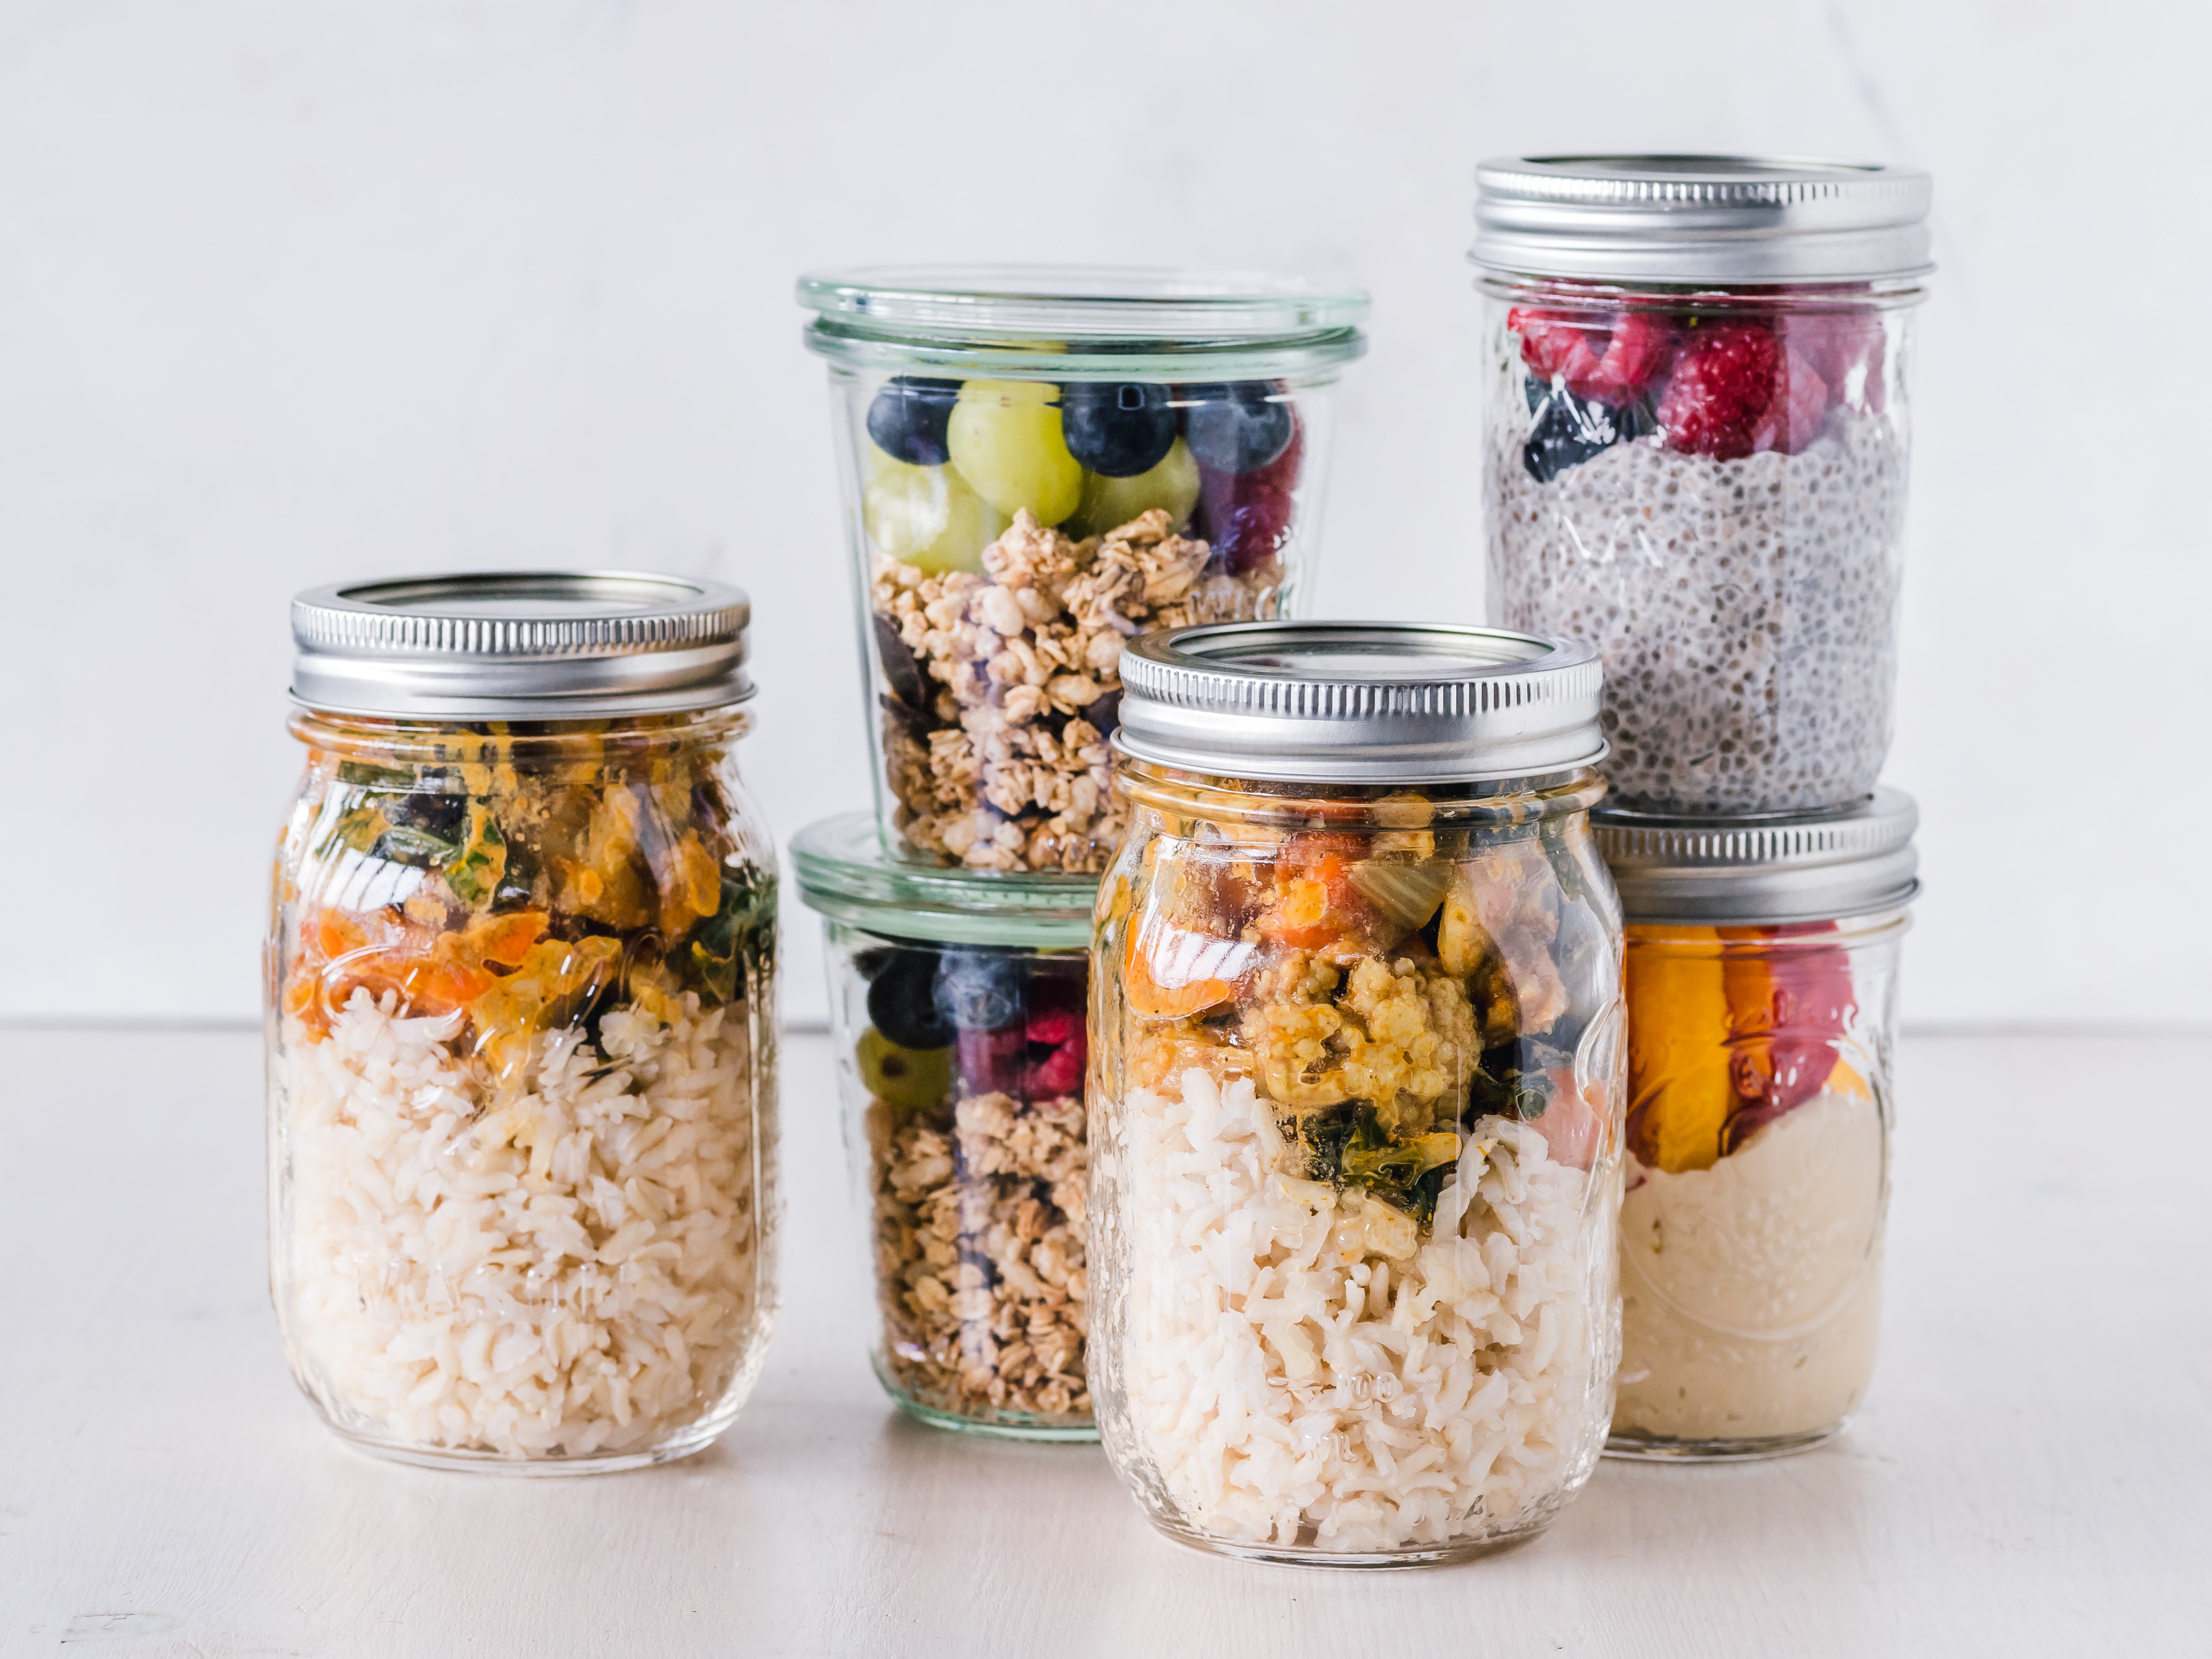 5 Healthy Tips for Eating Healthy over the Weekend.  Nutrition Tips to set you up for success, while still enjoying time with family and friends. Visit www.dawnplotts.com for more ideas!
Photo Courtesy Ella Olsson, Unsplash